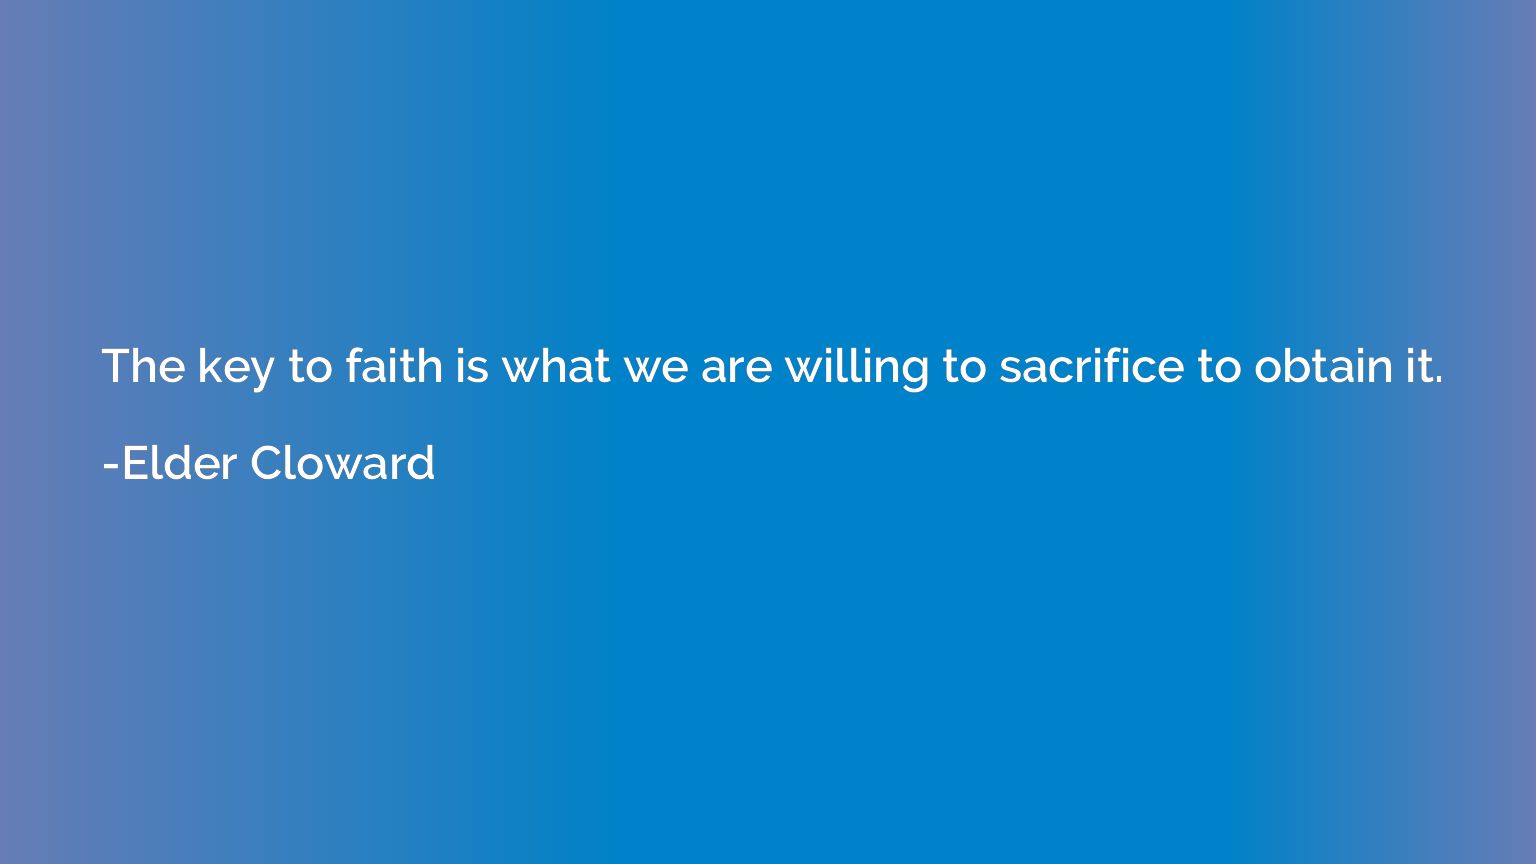 The key to faith is what we are willing to sacrifice to obta